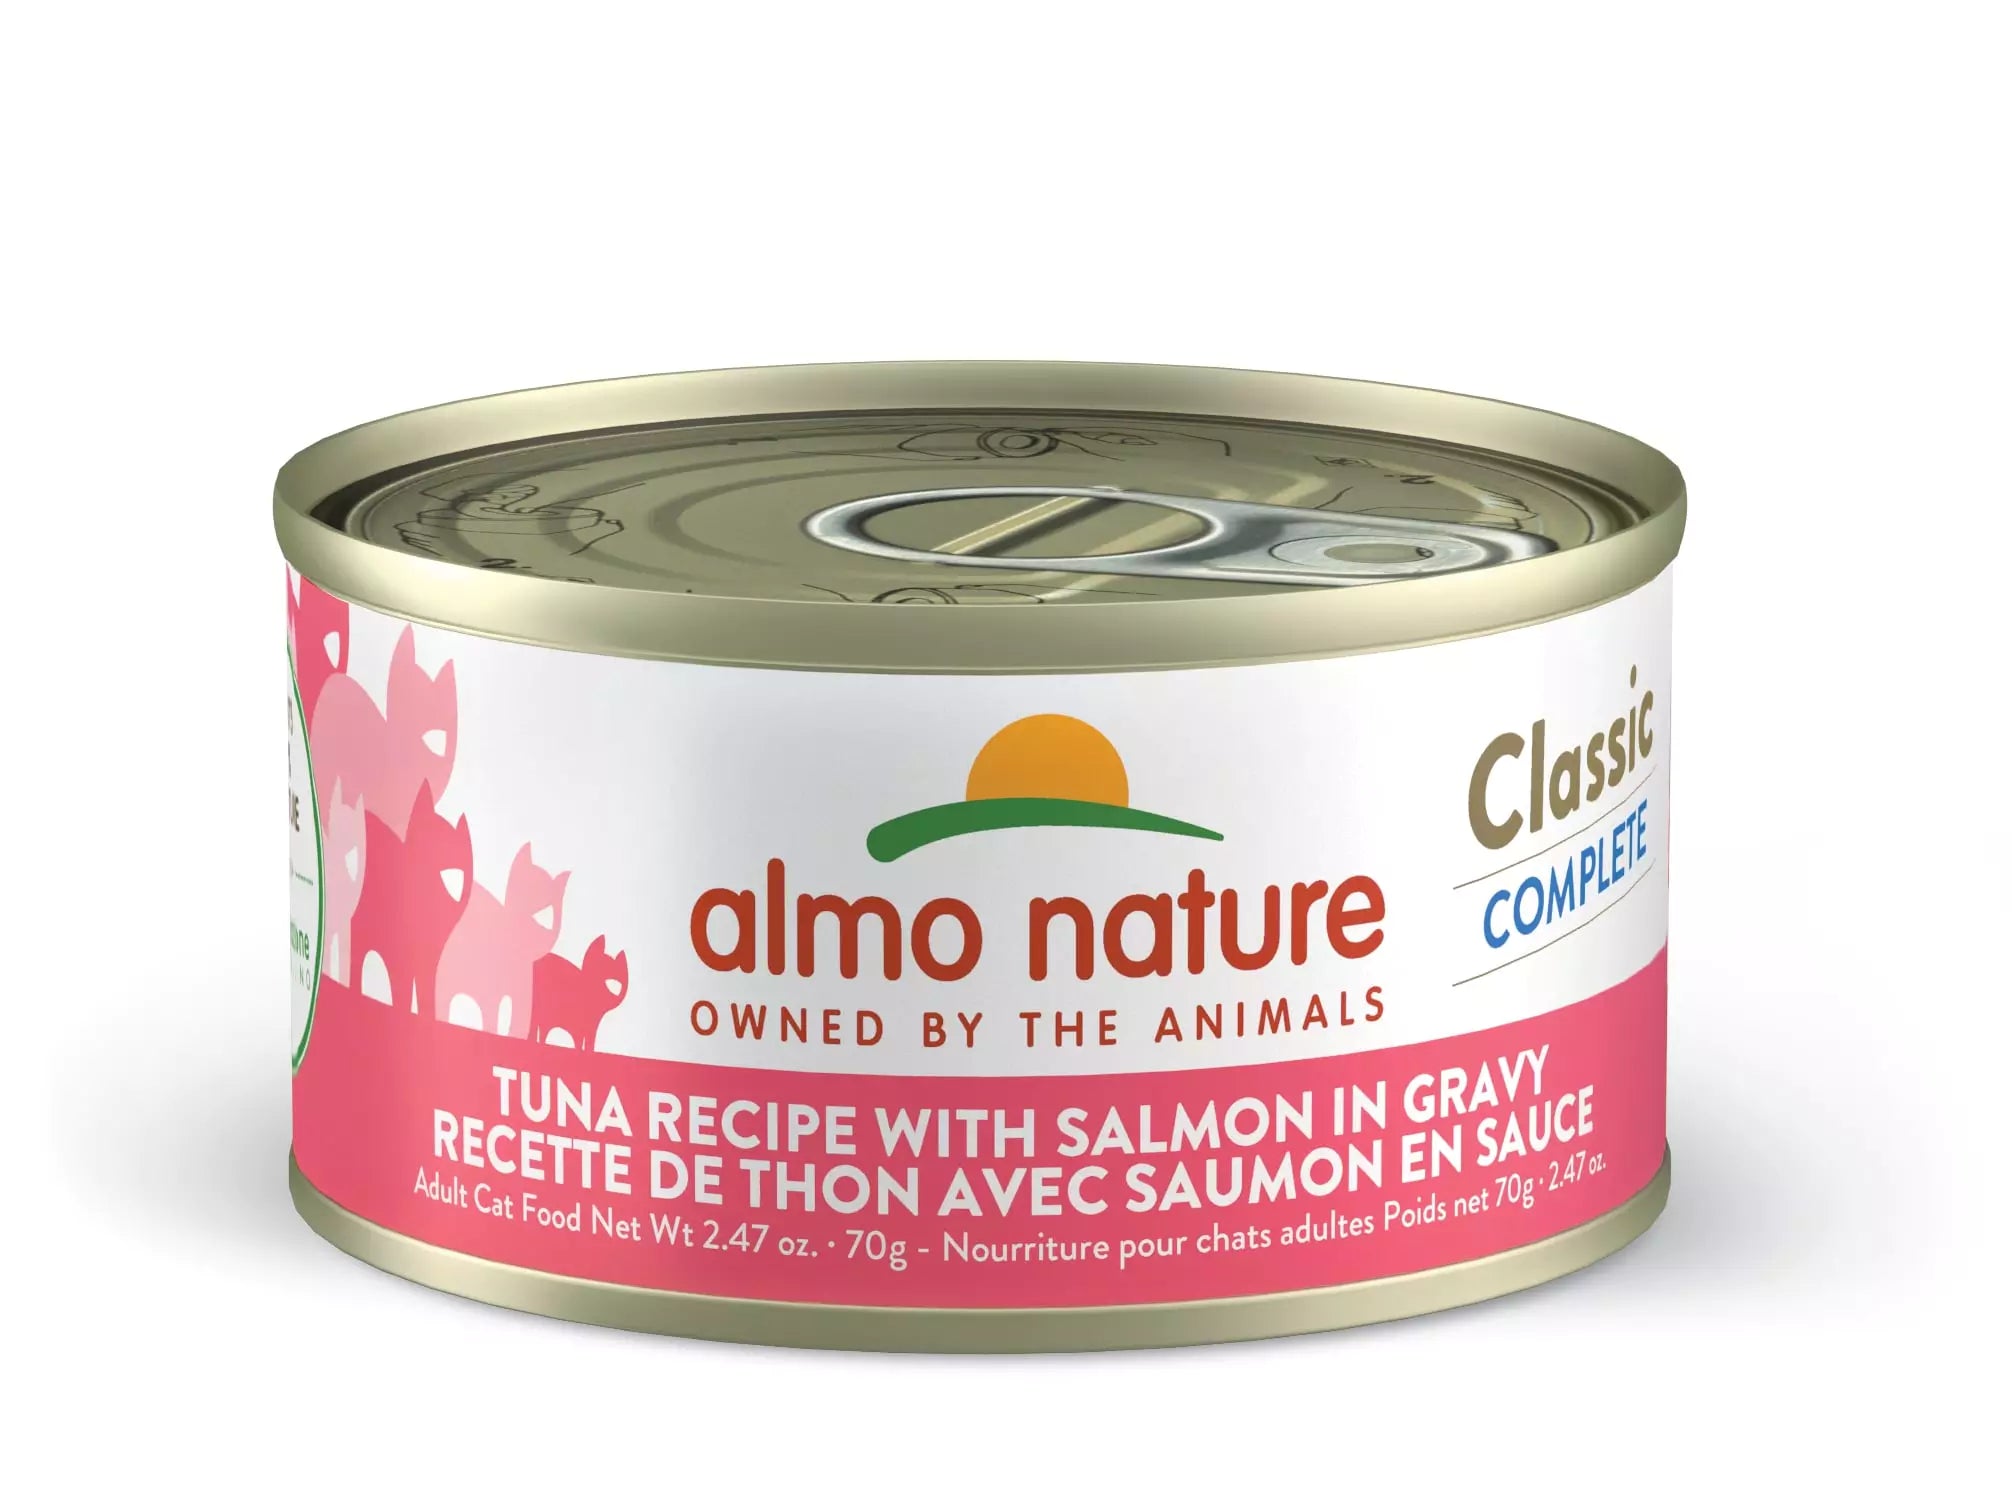 Almo Nature - Classic Complete - Tuna With Salmon in Gravy (Wet Cat Food)